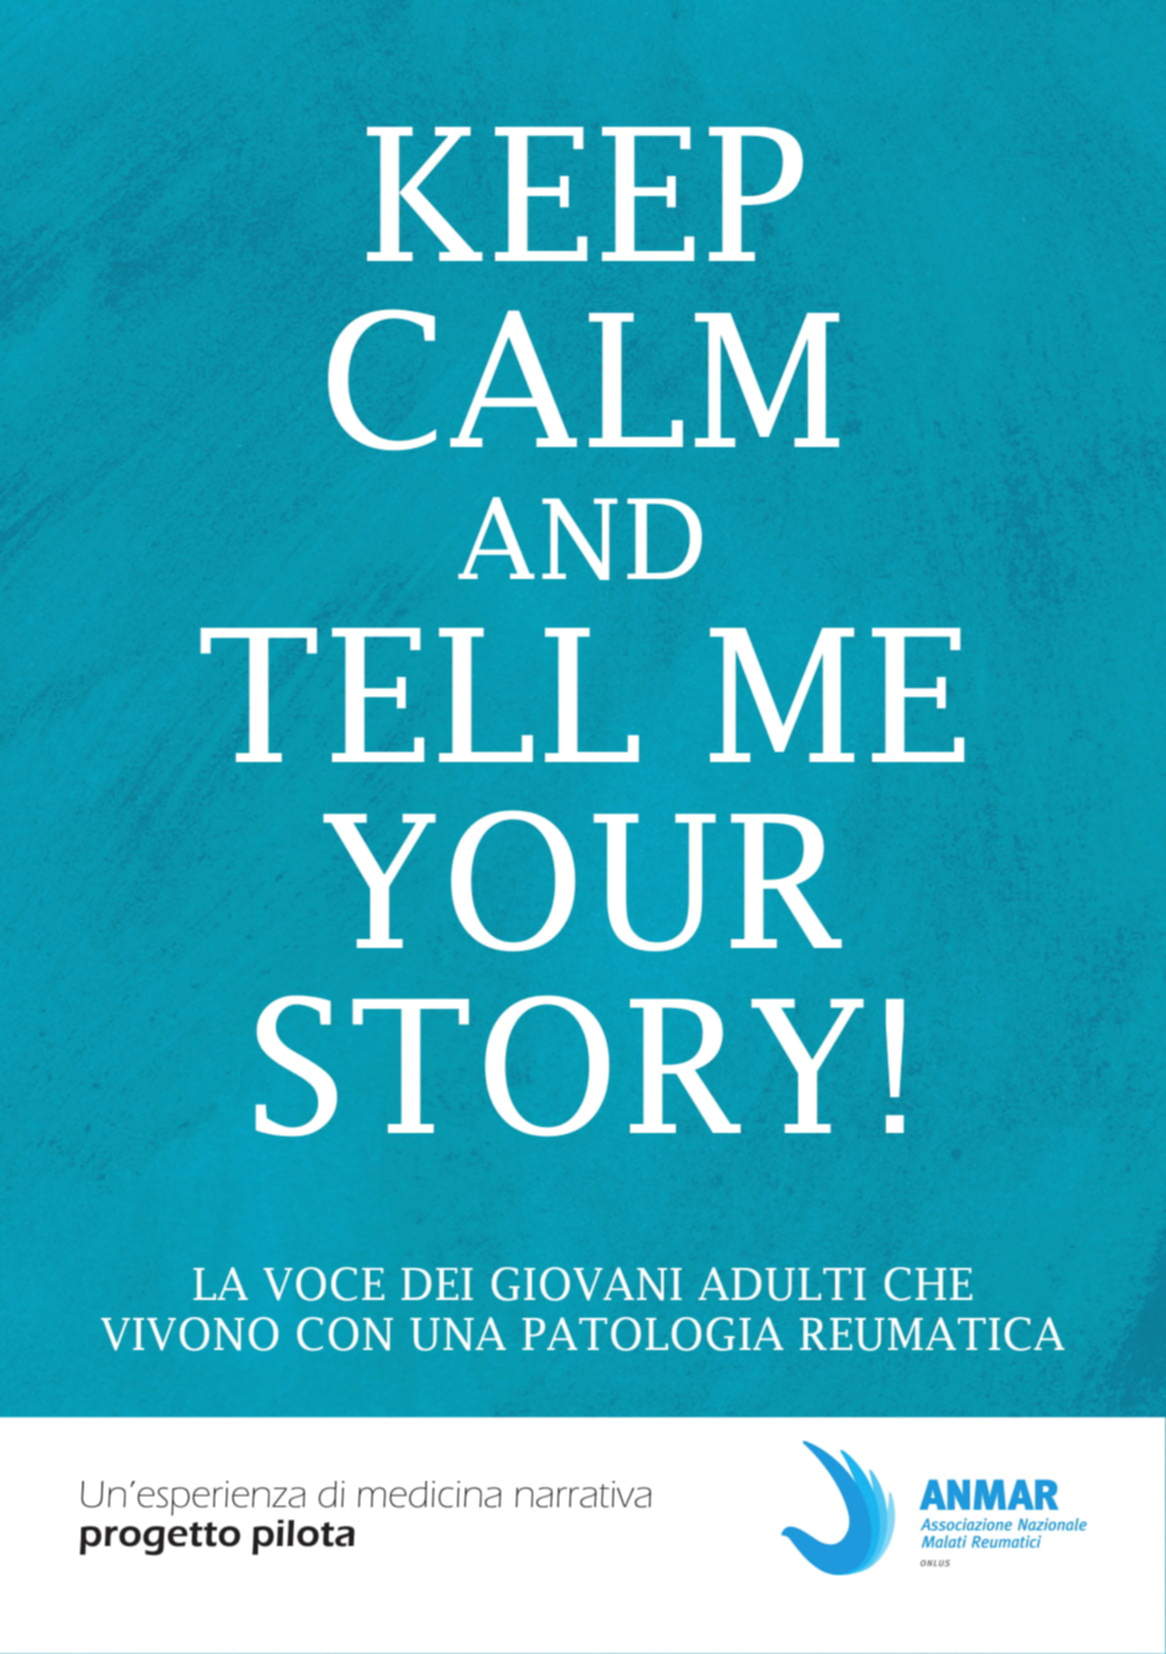 KEEP_CALM_AND_TELL_ME_YOUR_STORY-pagine_affiancate-01